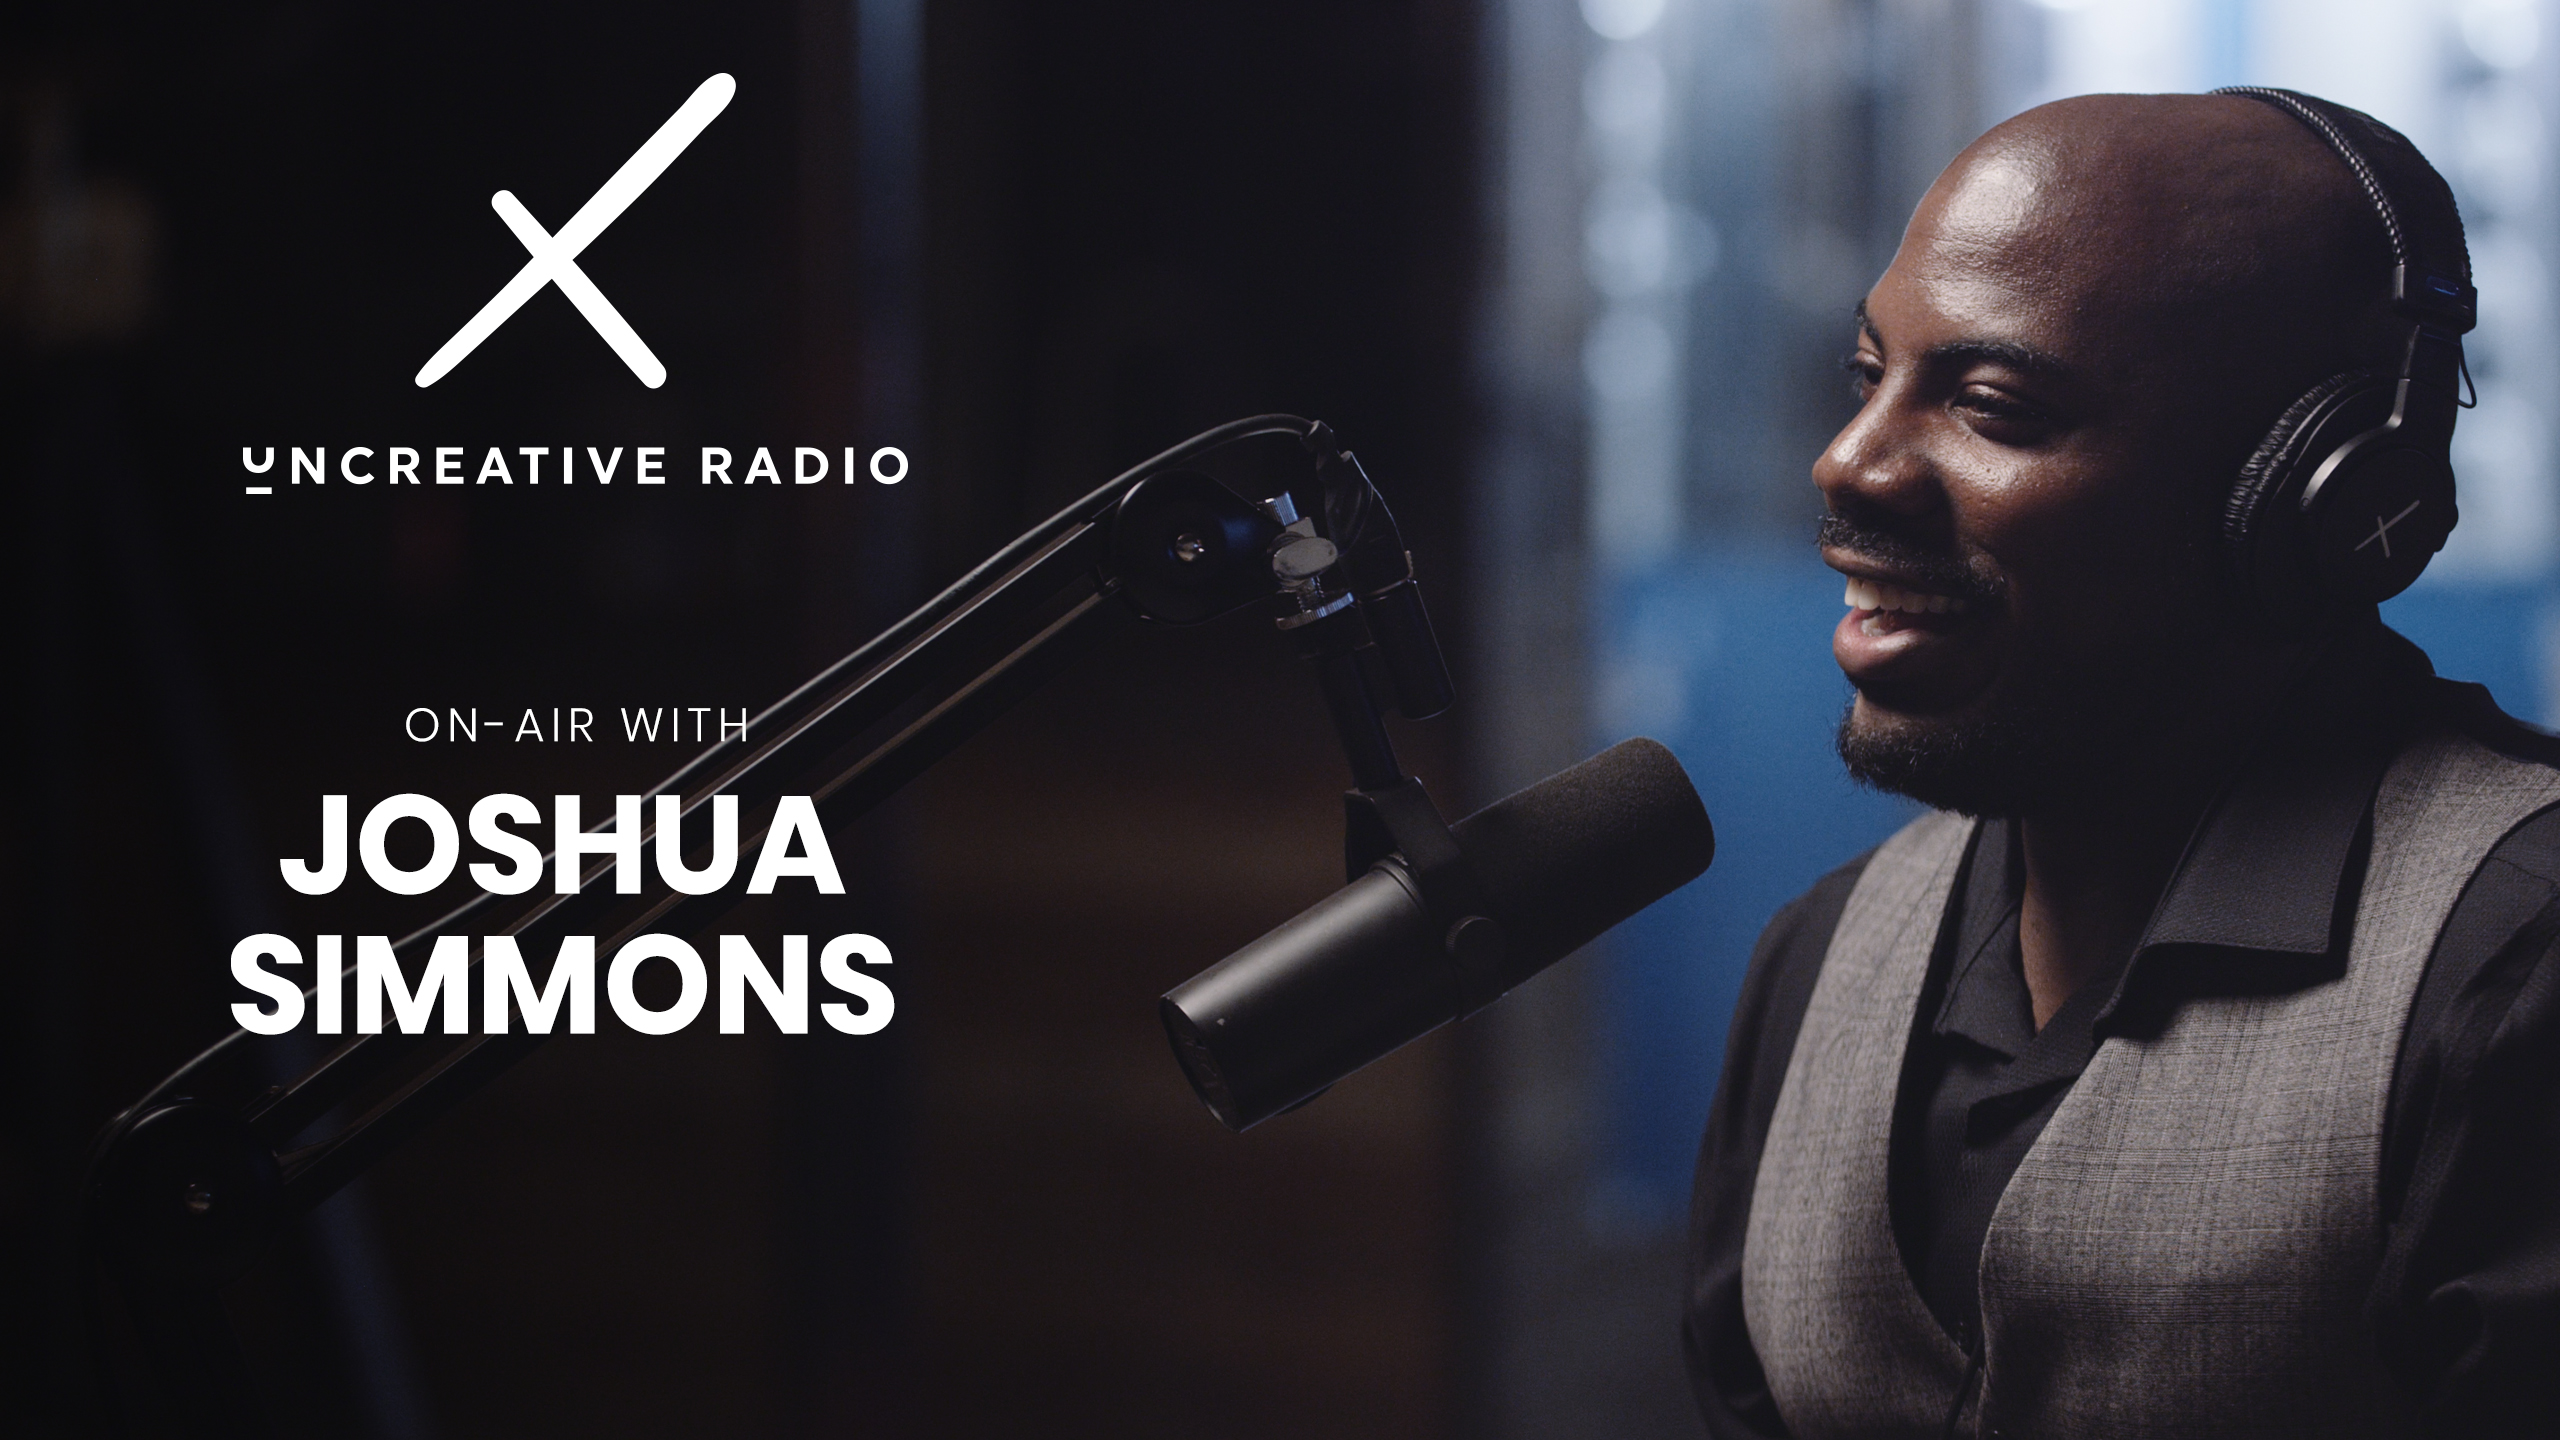 Uncreative Radio On Air with Joshua Simmons wearing black headphones smiling and by microphone